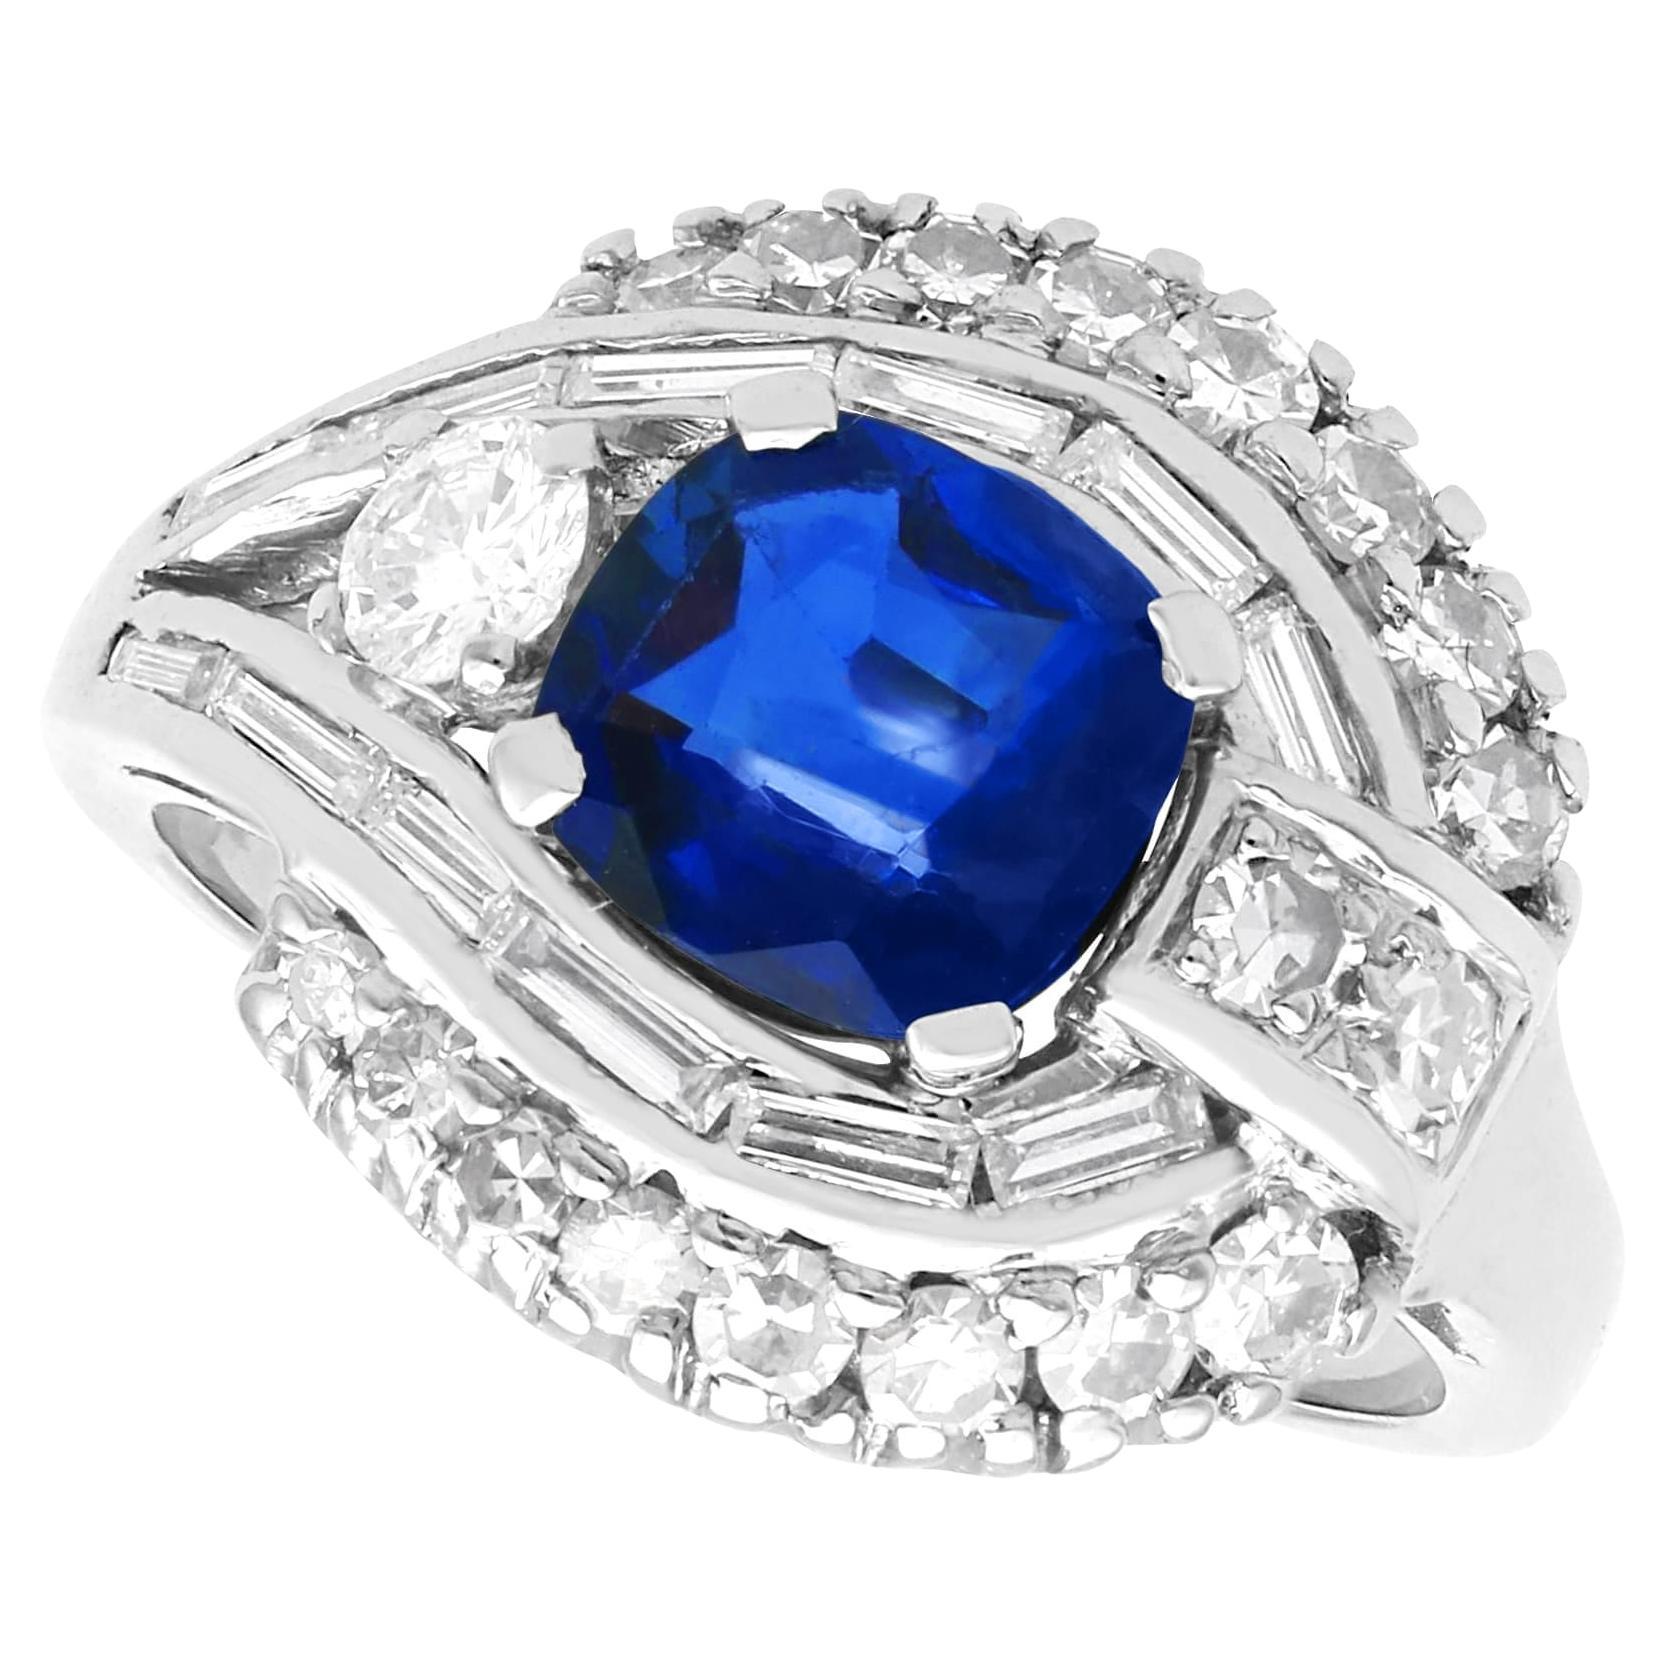 Vintage 1.24 Carat Basaltic Sapphire 0.70ct Diamond 14k White Gold Cluster Ring For Sale